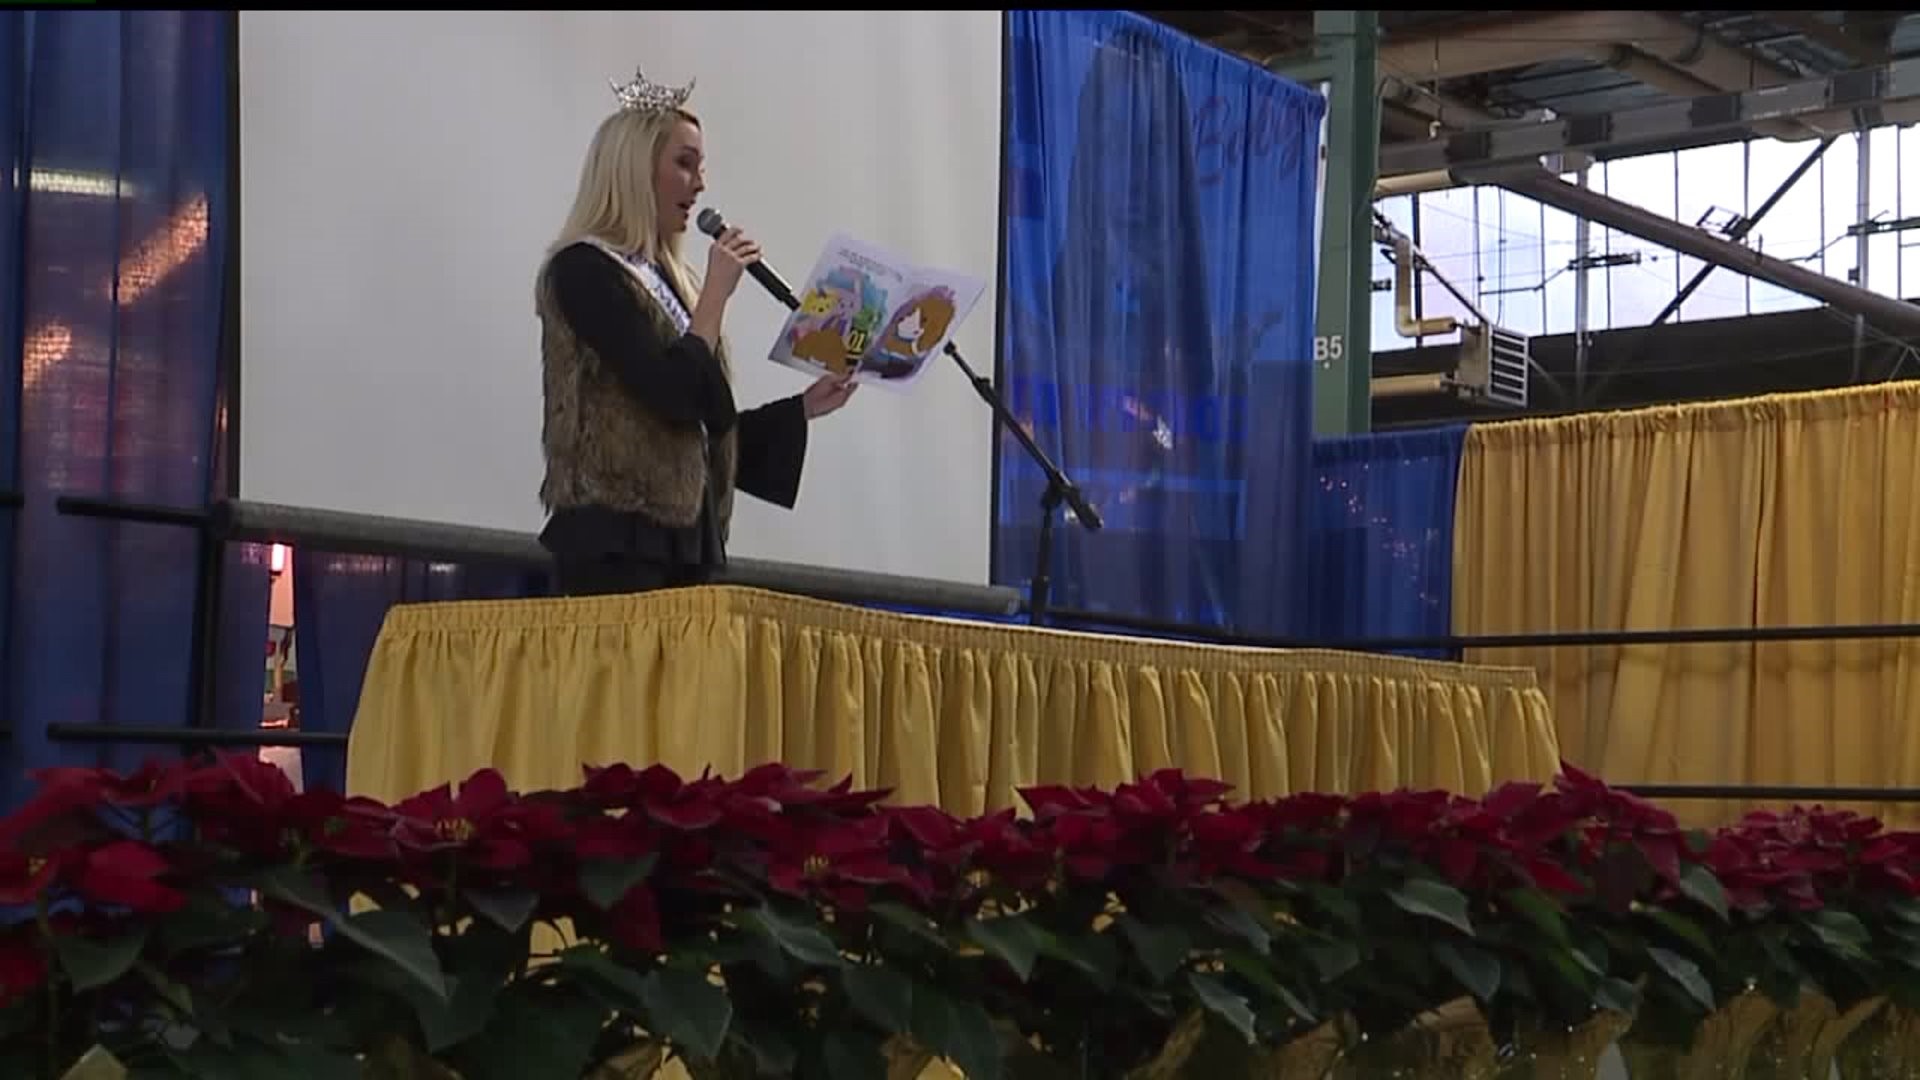 Miss PA reads to children at the farm show